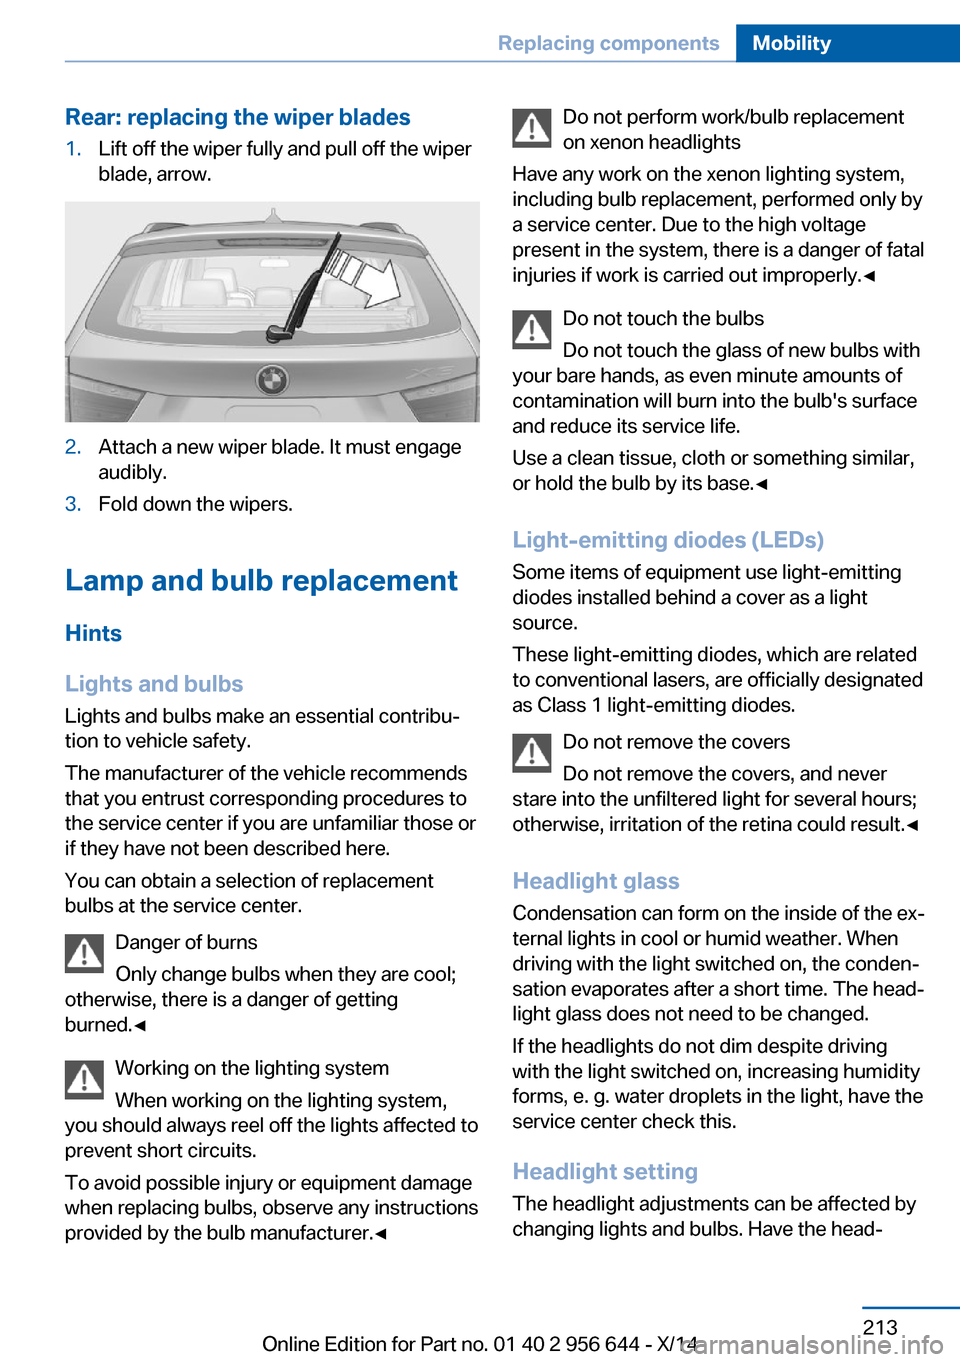 BMW X3 2014 F25 Owners Manual Rear: replacing the wiper blades1.Lift off the wiper fully and pull off the wiper
blade, arrow.2.Attach a new wiper blade. It must engage
audibly.3.Fold down the wipers.
Lamp and bulb replacement
Hint